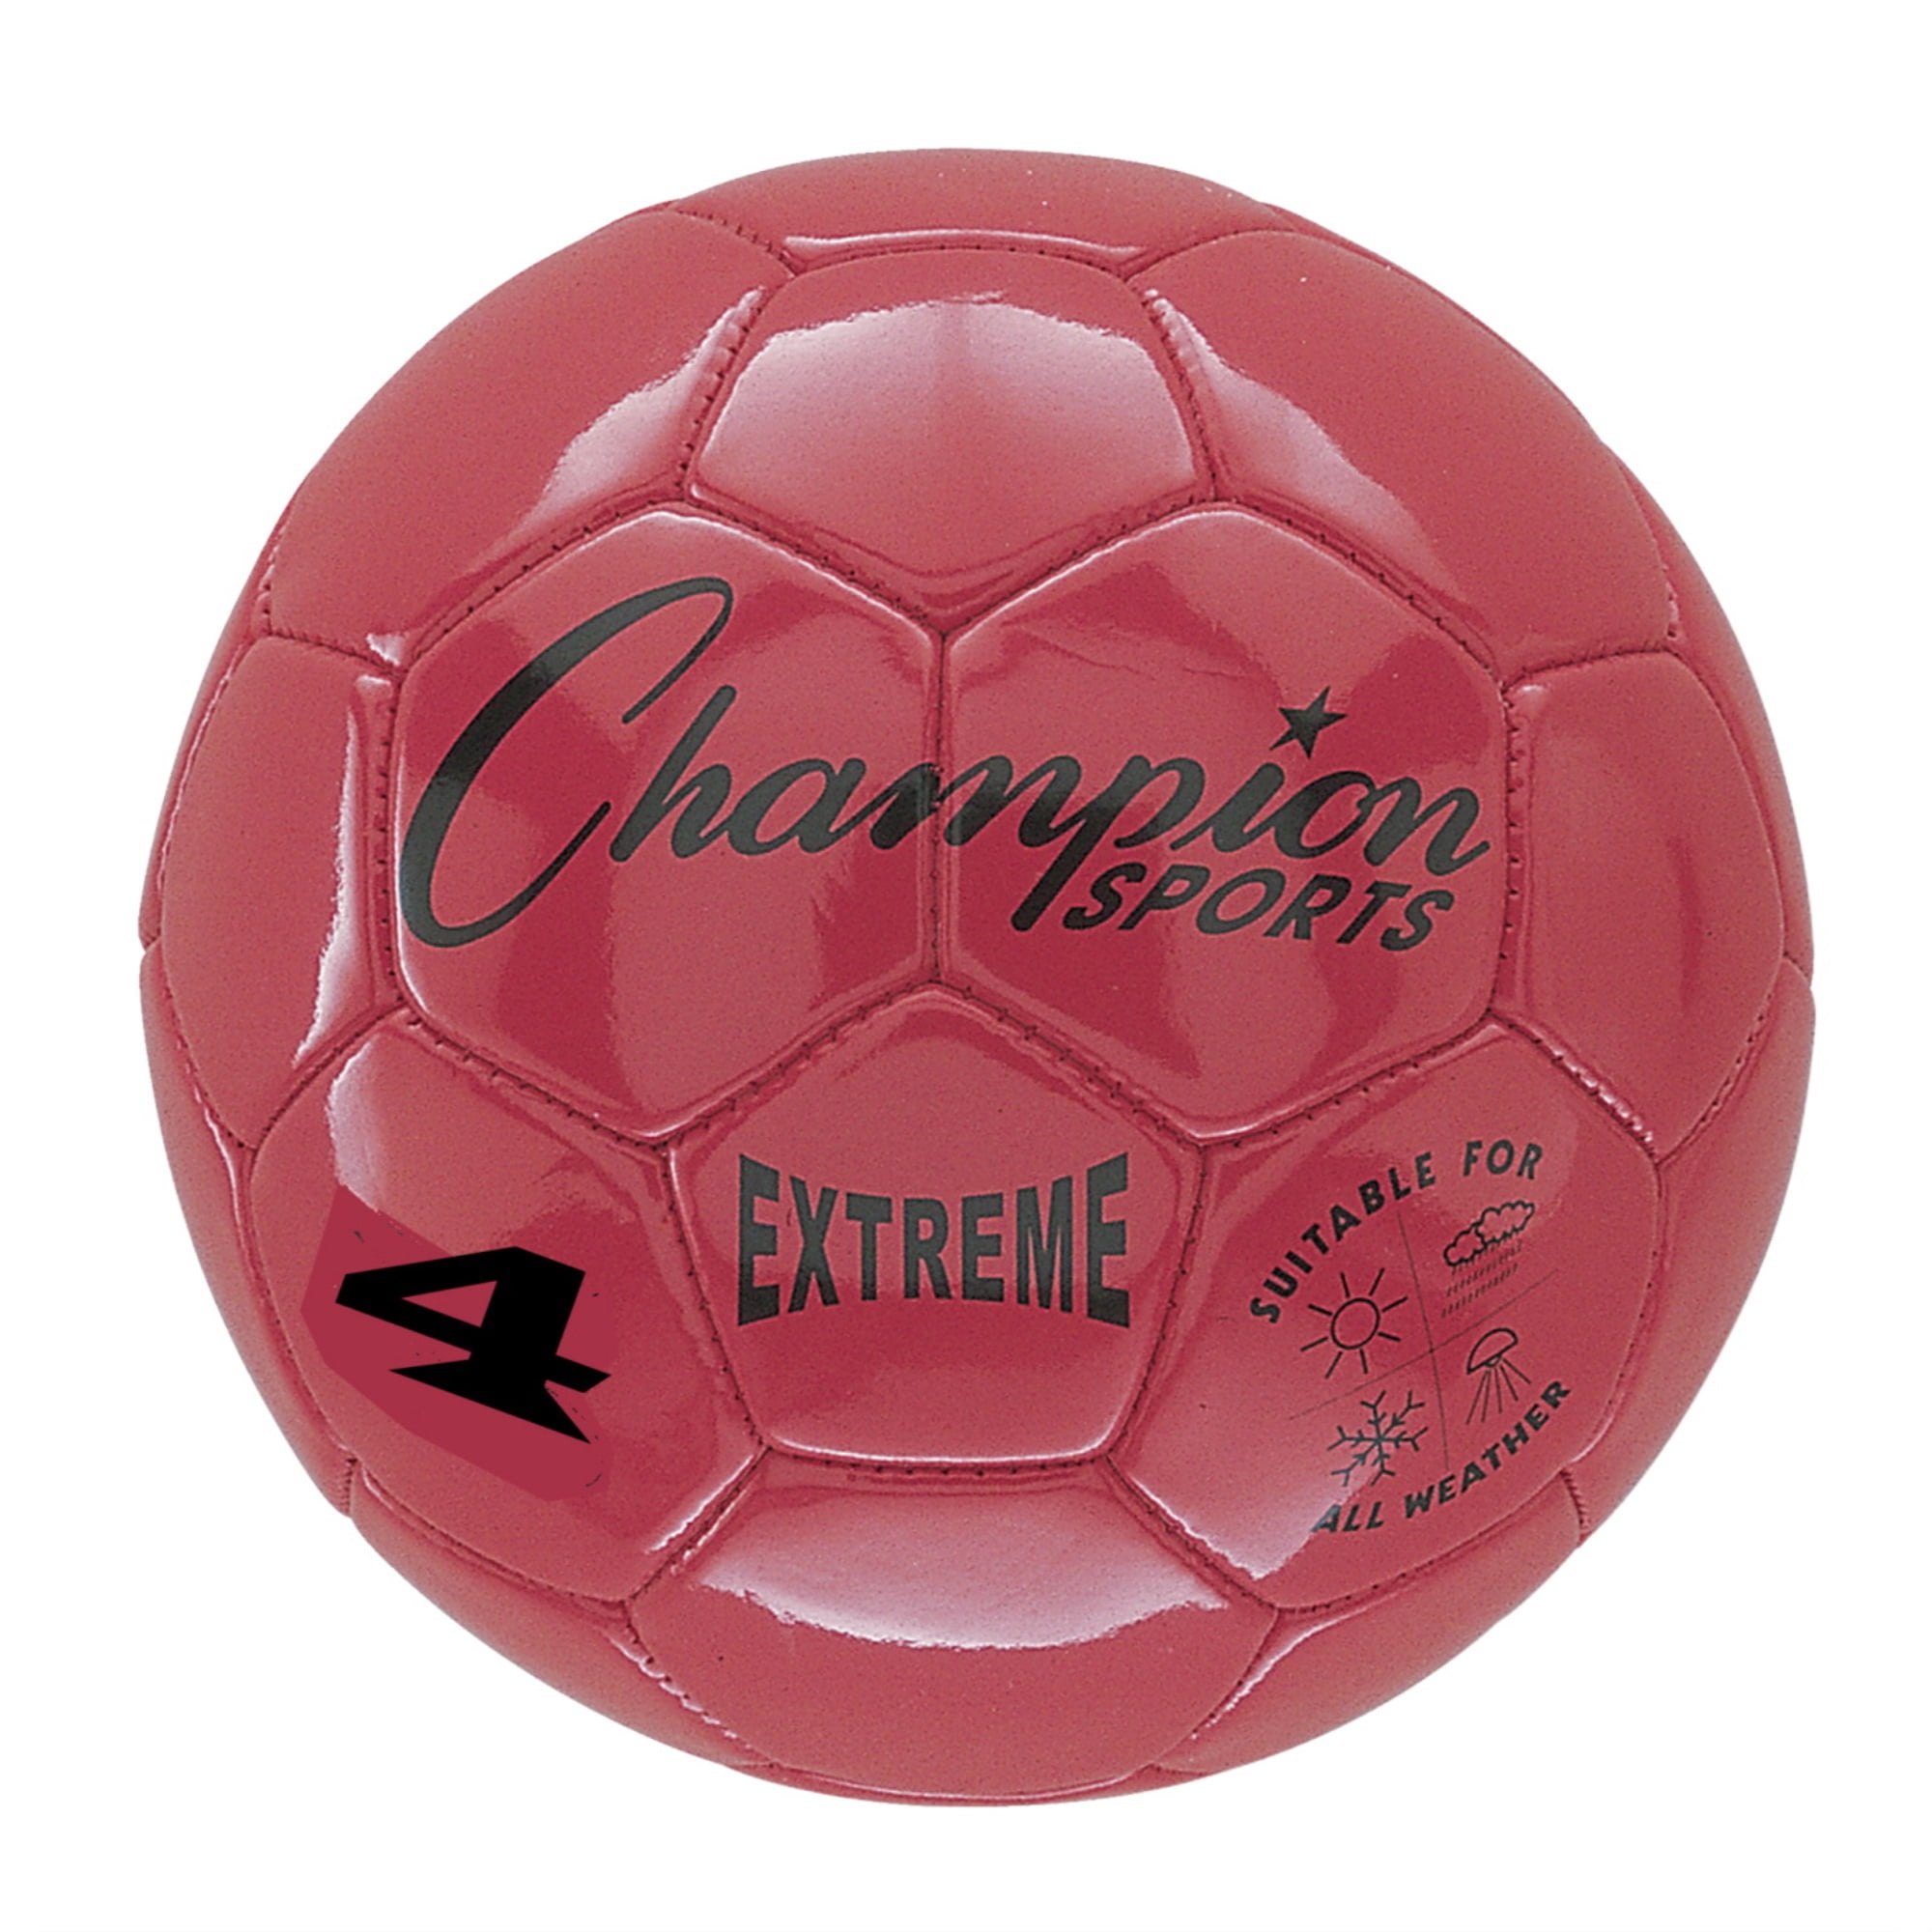 Sizes 3 4 Champion Sports Extreme Series Composite Soccer Ball 5 in Multiple Colors 